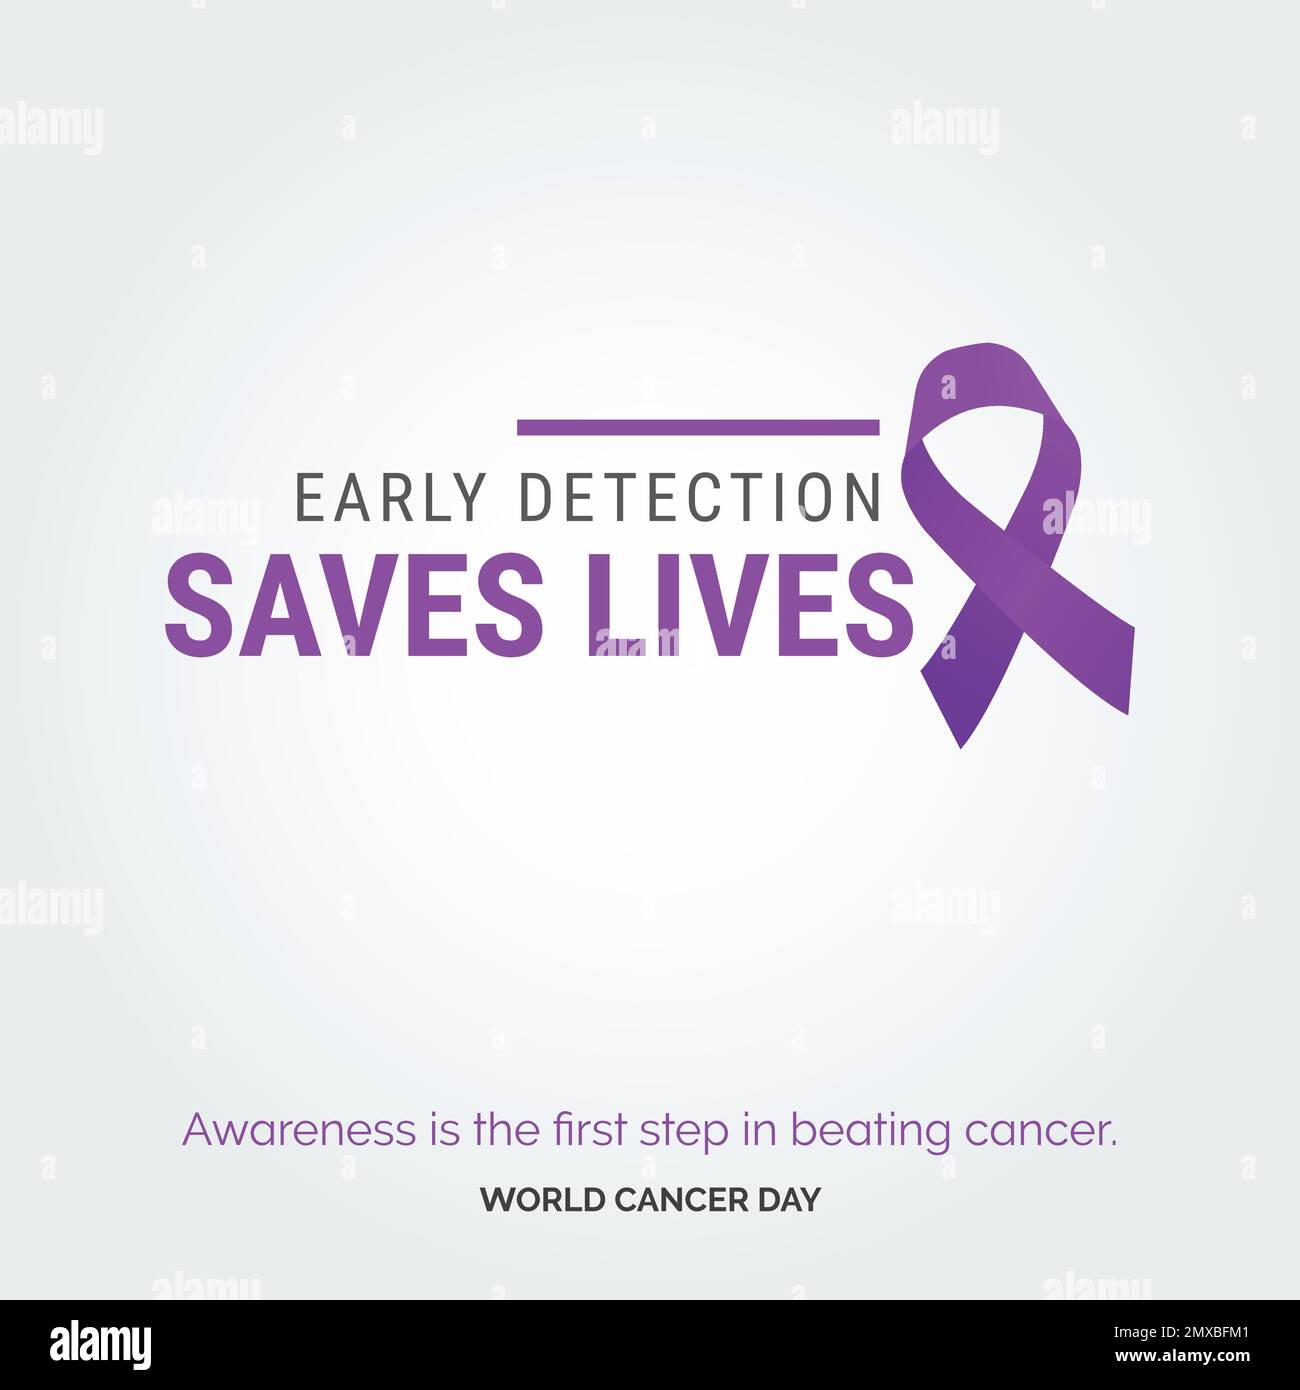 Early Detection Saves Lives Ribbon Typography. Awareness is the first step in beating cancer - World Cancer Day Stock Vector